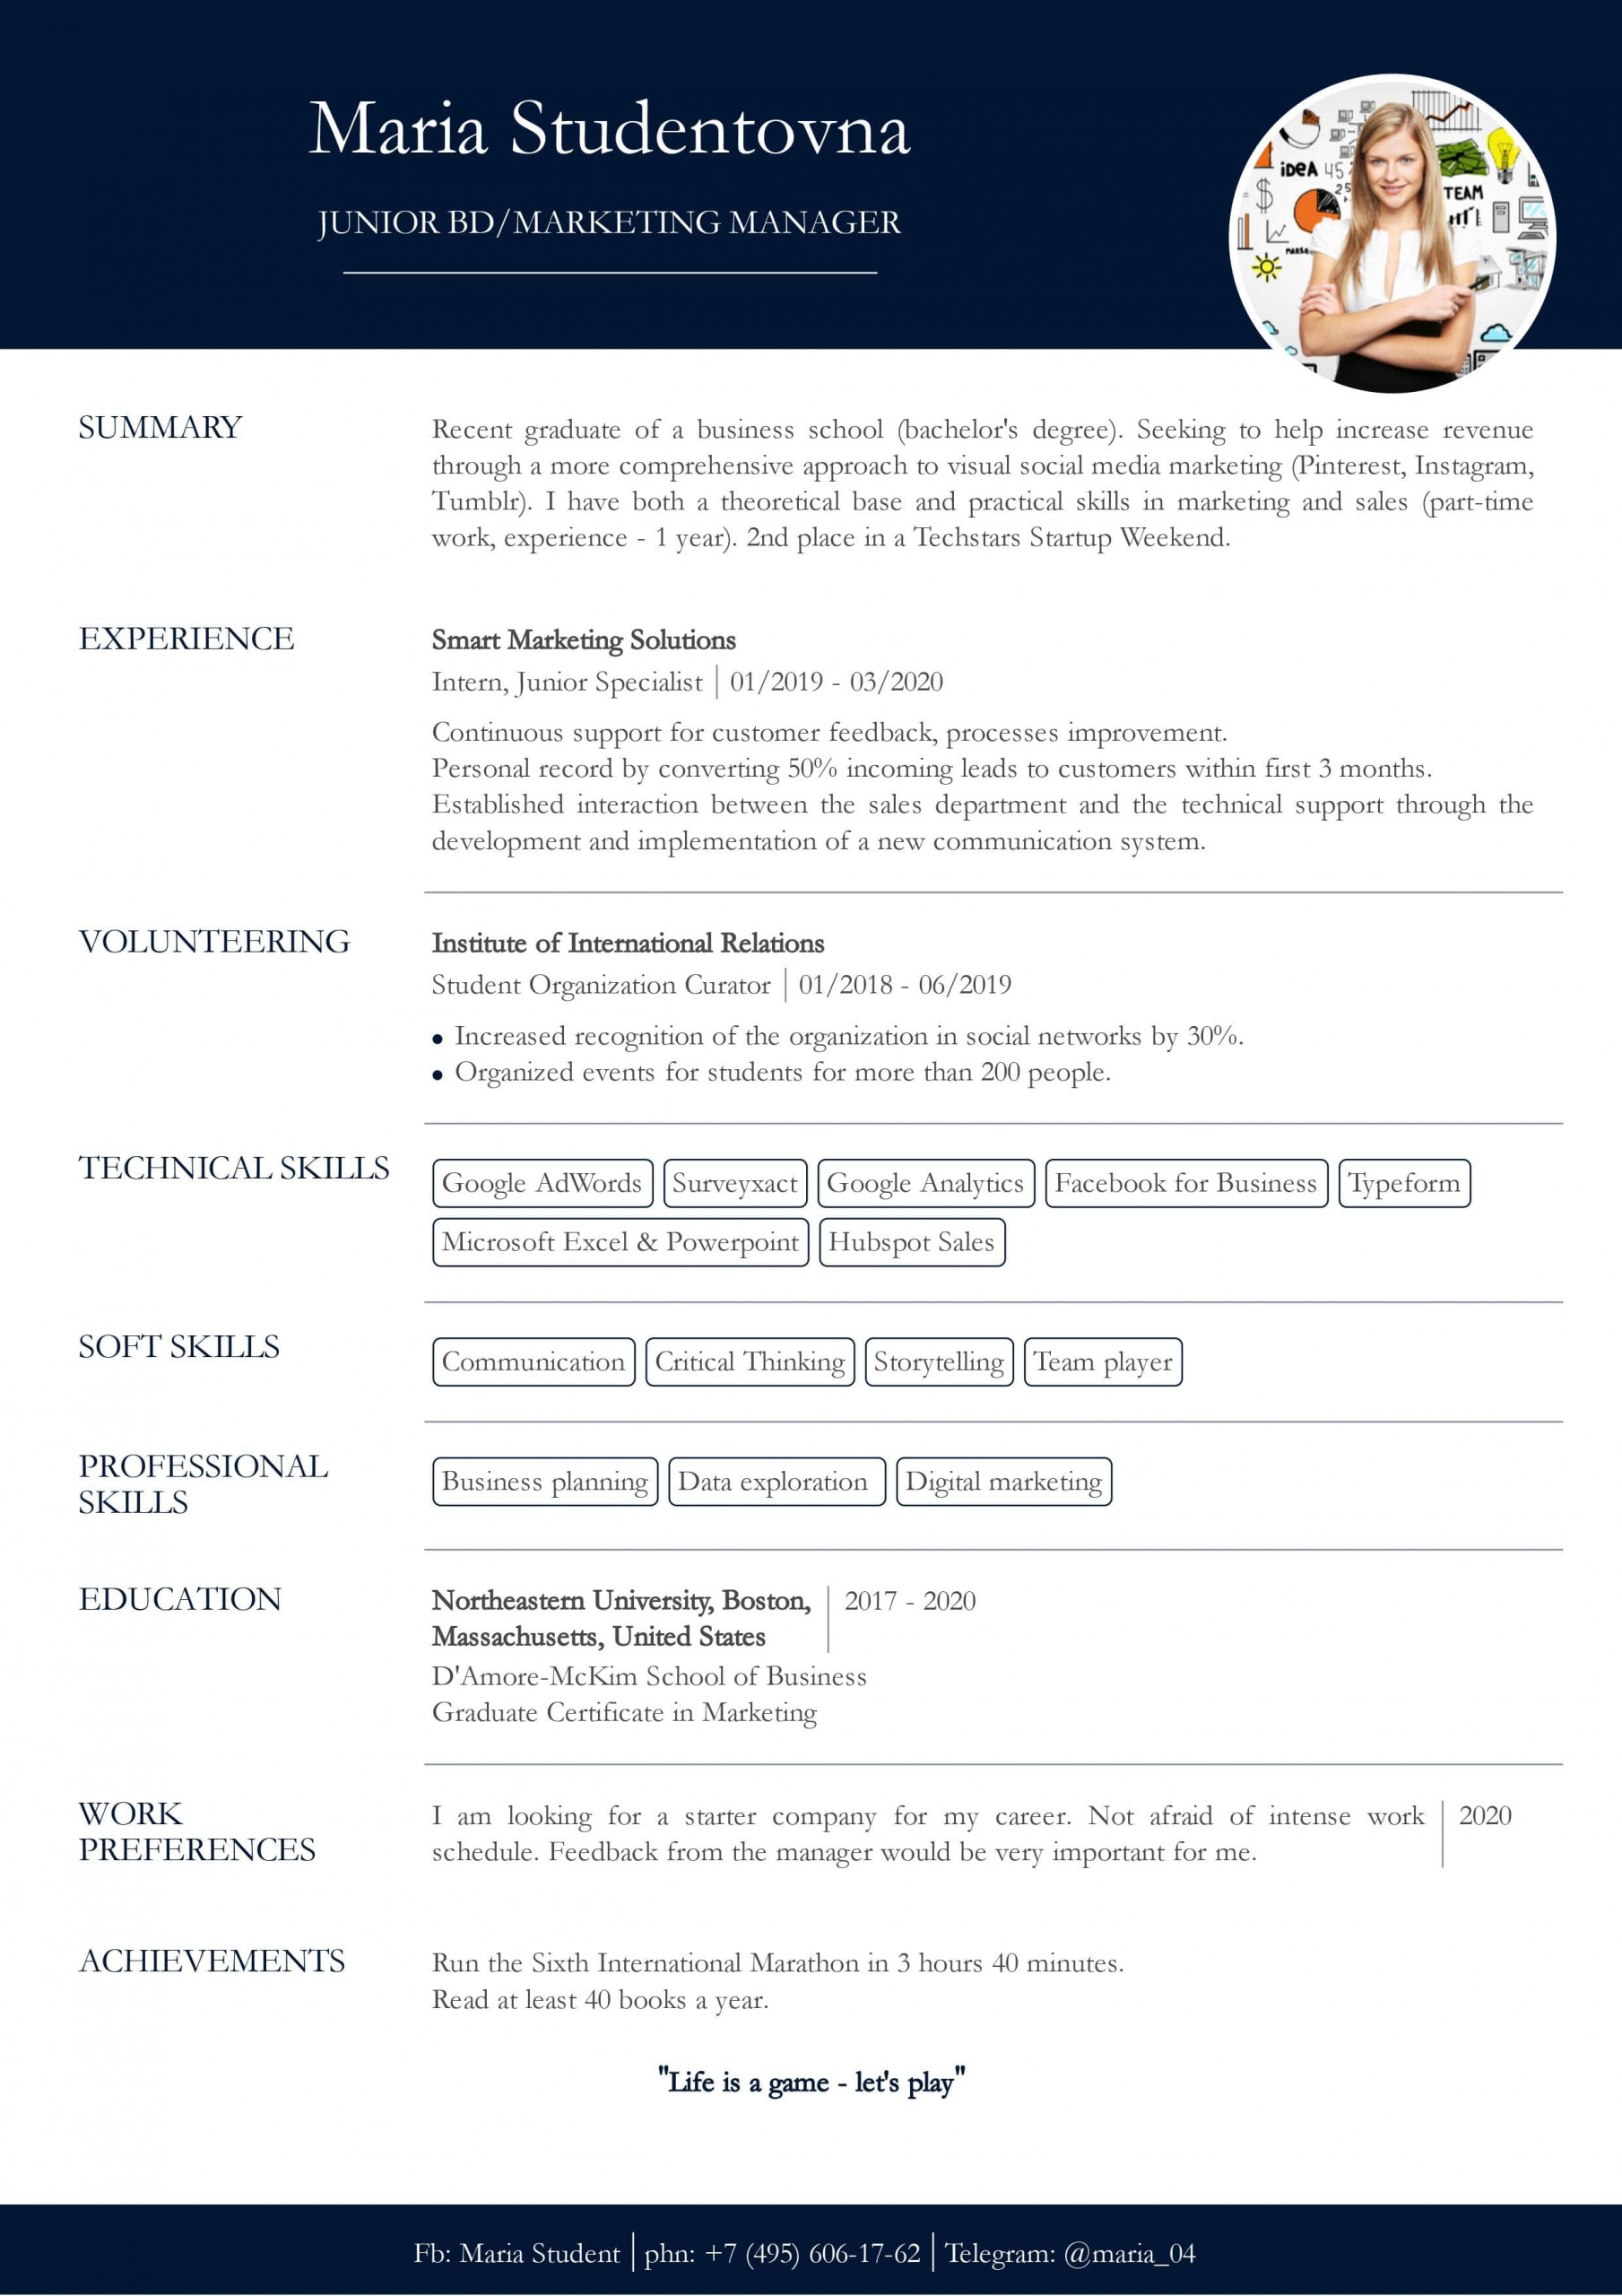 Sample Resume for Jobs with No Experience Resume with No Work Experience. Sample for Students. – Cv2you Blog